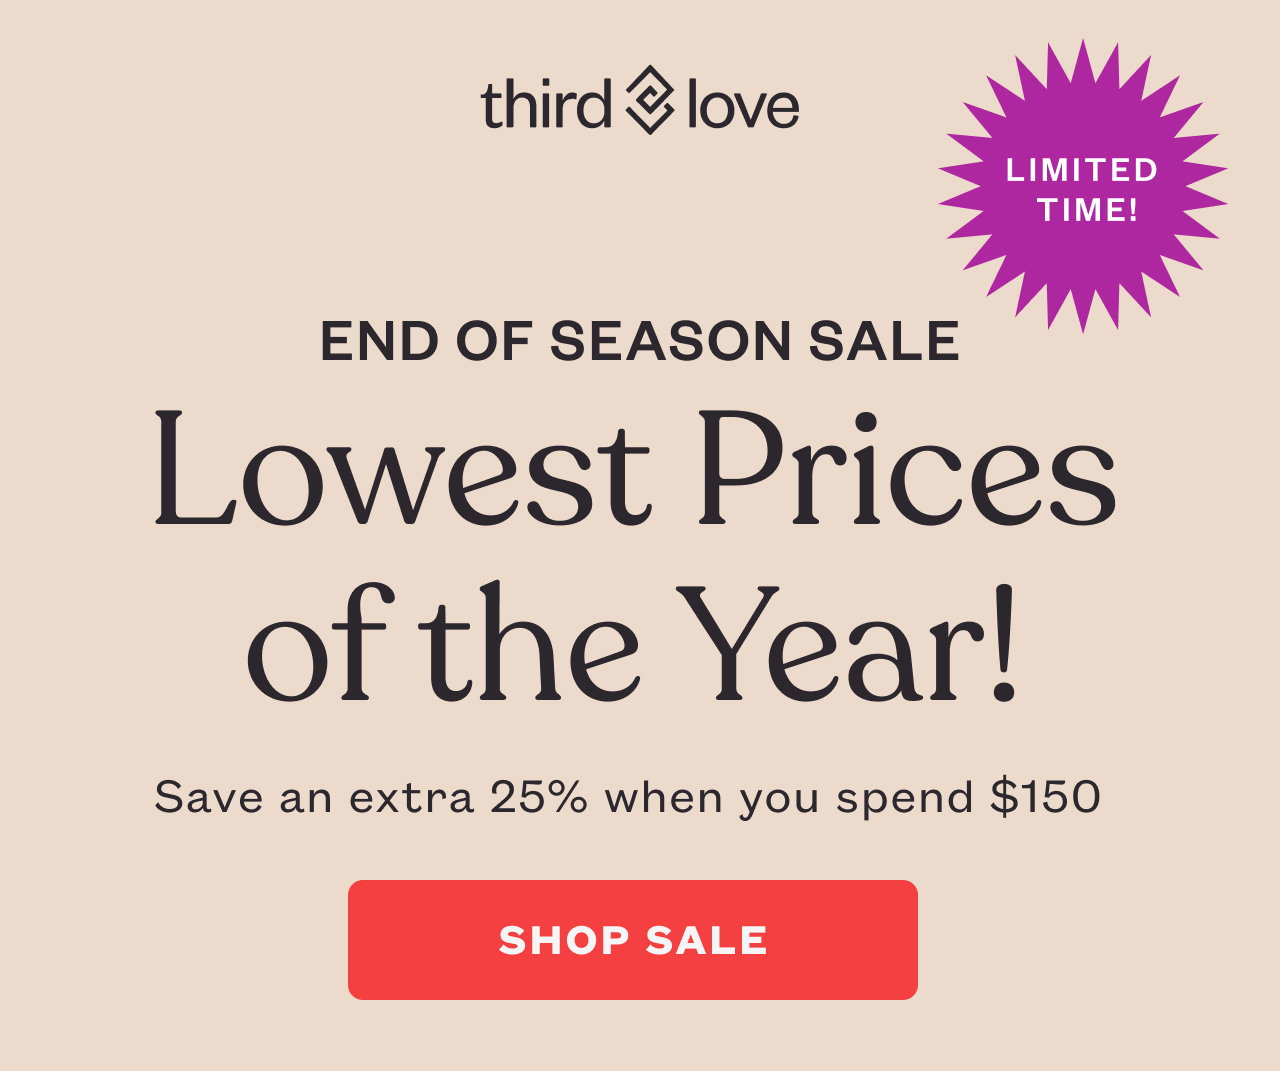 Hurry! Your $30 Off Won't Last Forever ⏳ - Third Love